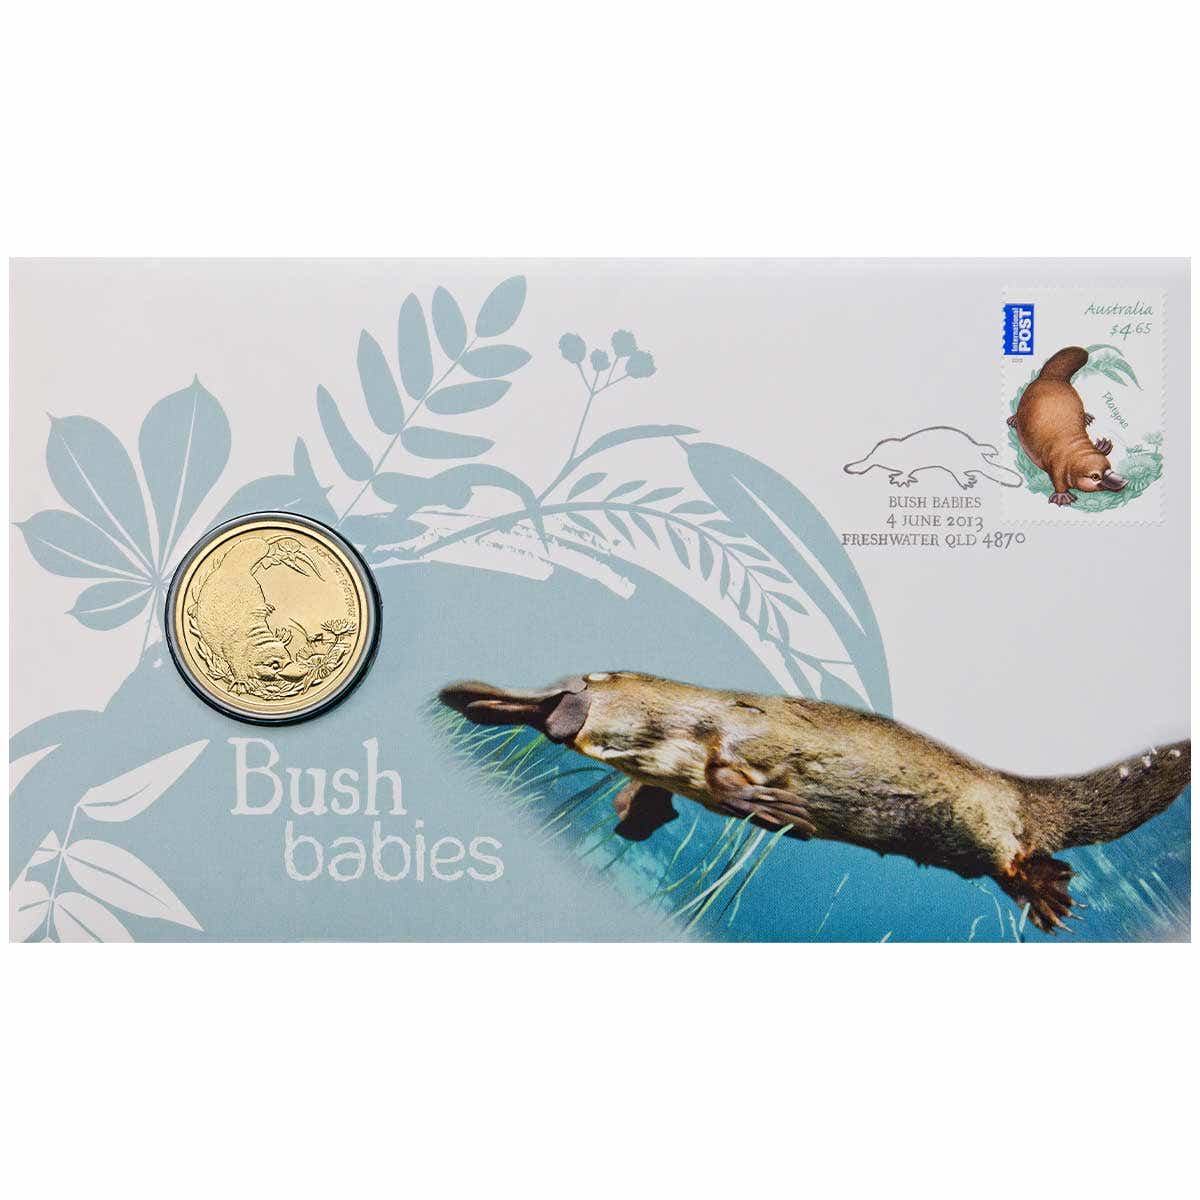 Bush Babies Platypus 2013 $1 Stamp & Coin Cover